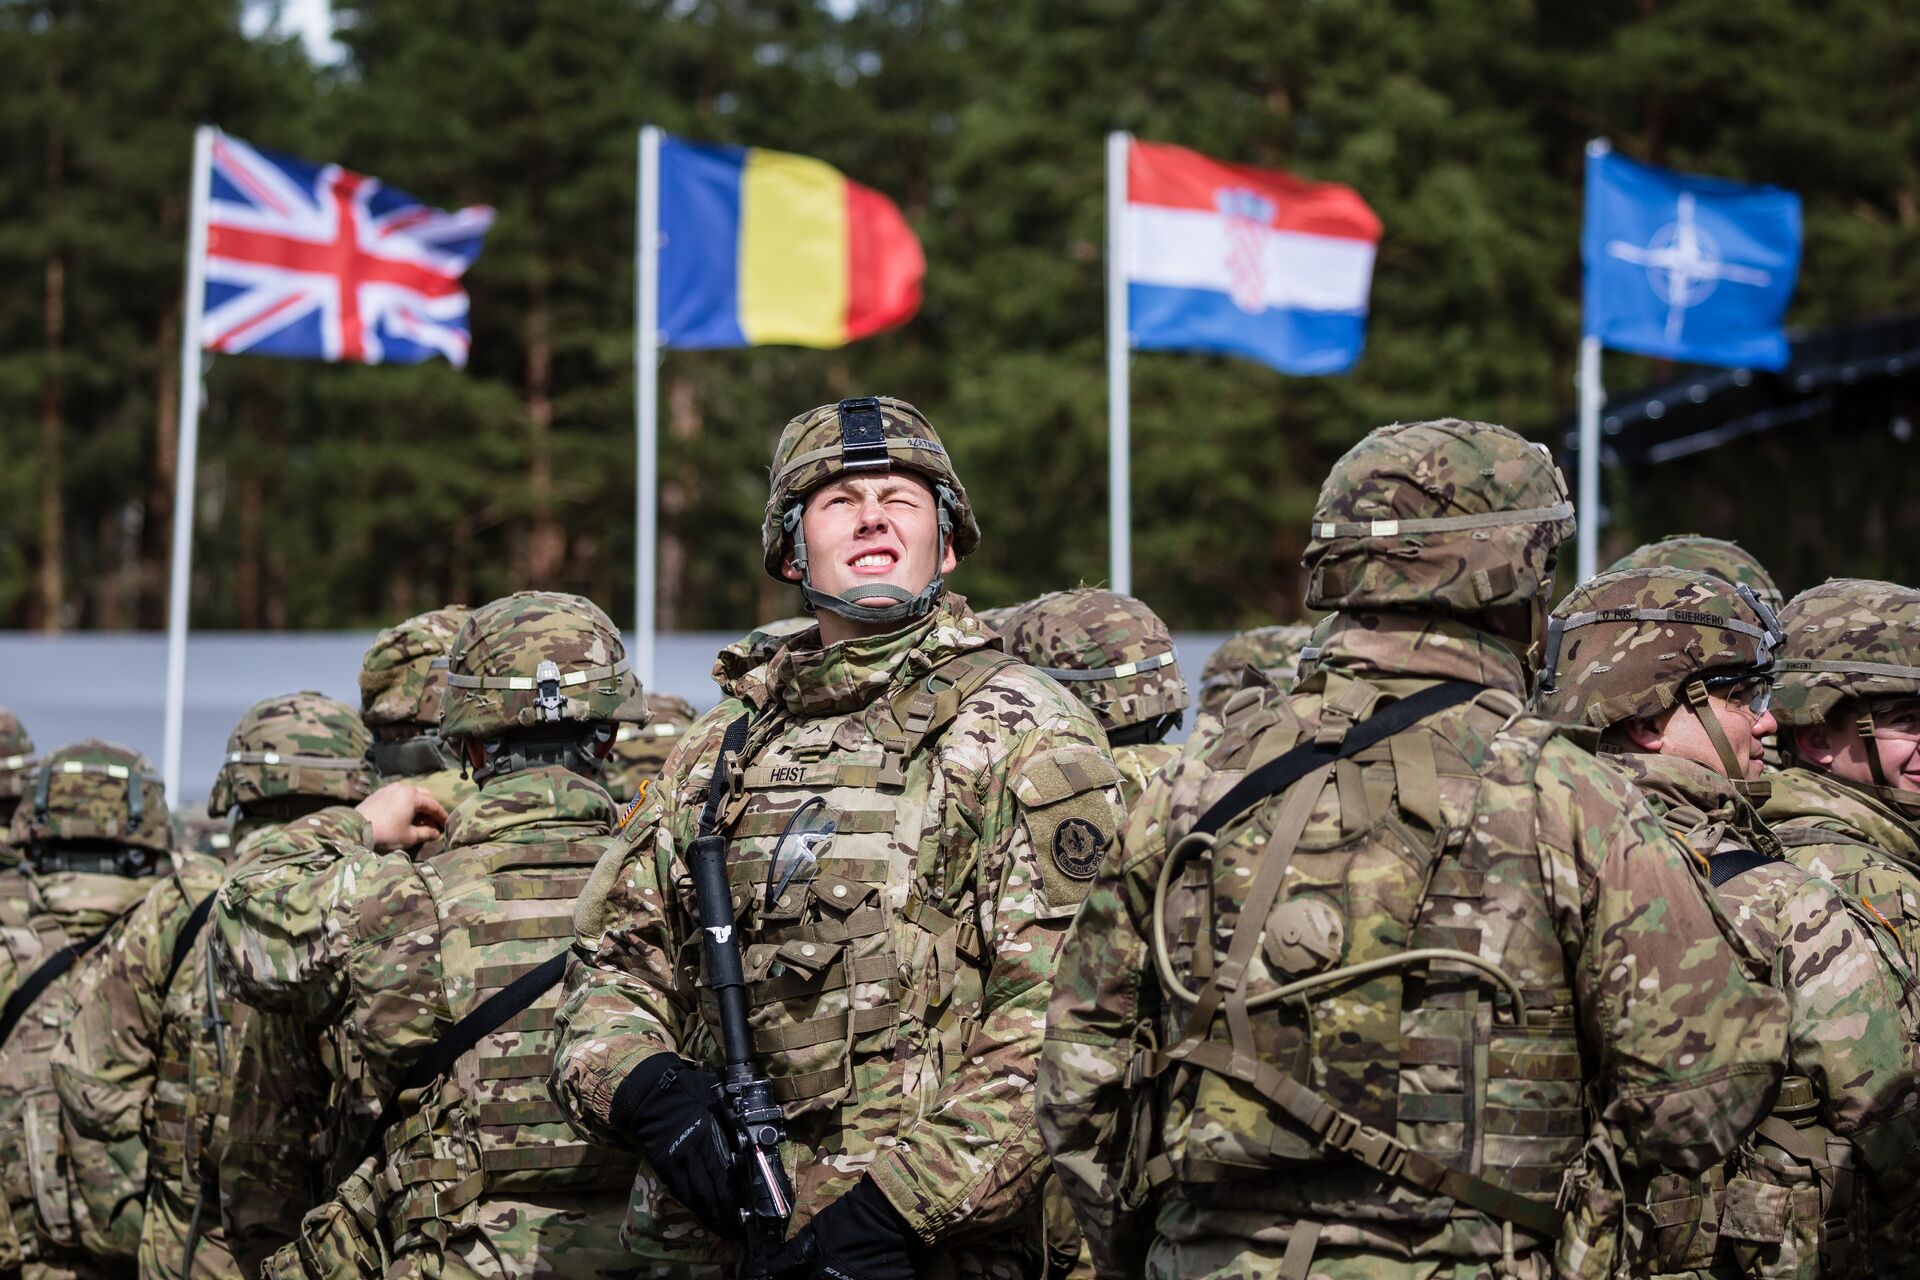 US soldiers are pictured prior the beginning of the official welcoming ceremony of NATO troops in Orzysz, Poland, on April 13, 2017. - Sputnik International, 1920, 06.12.2021